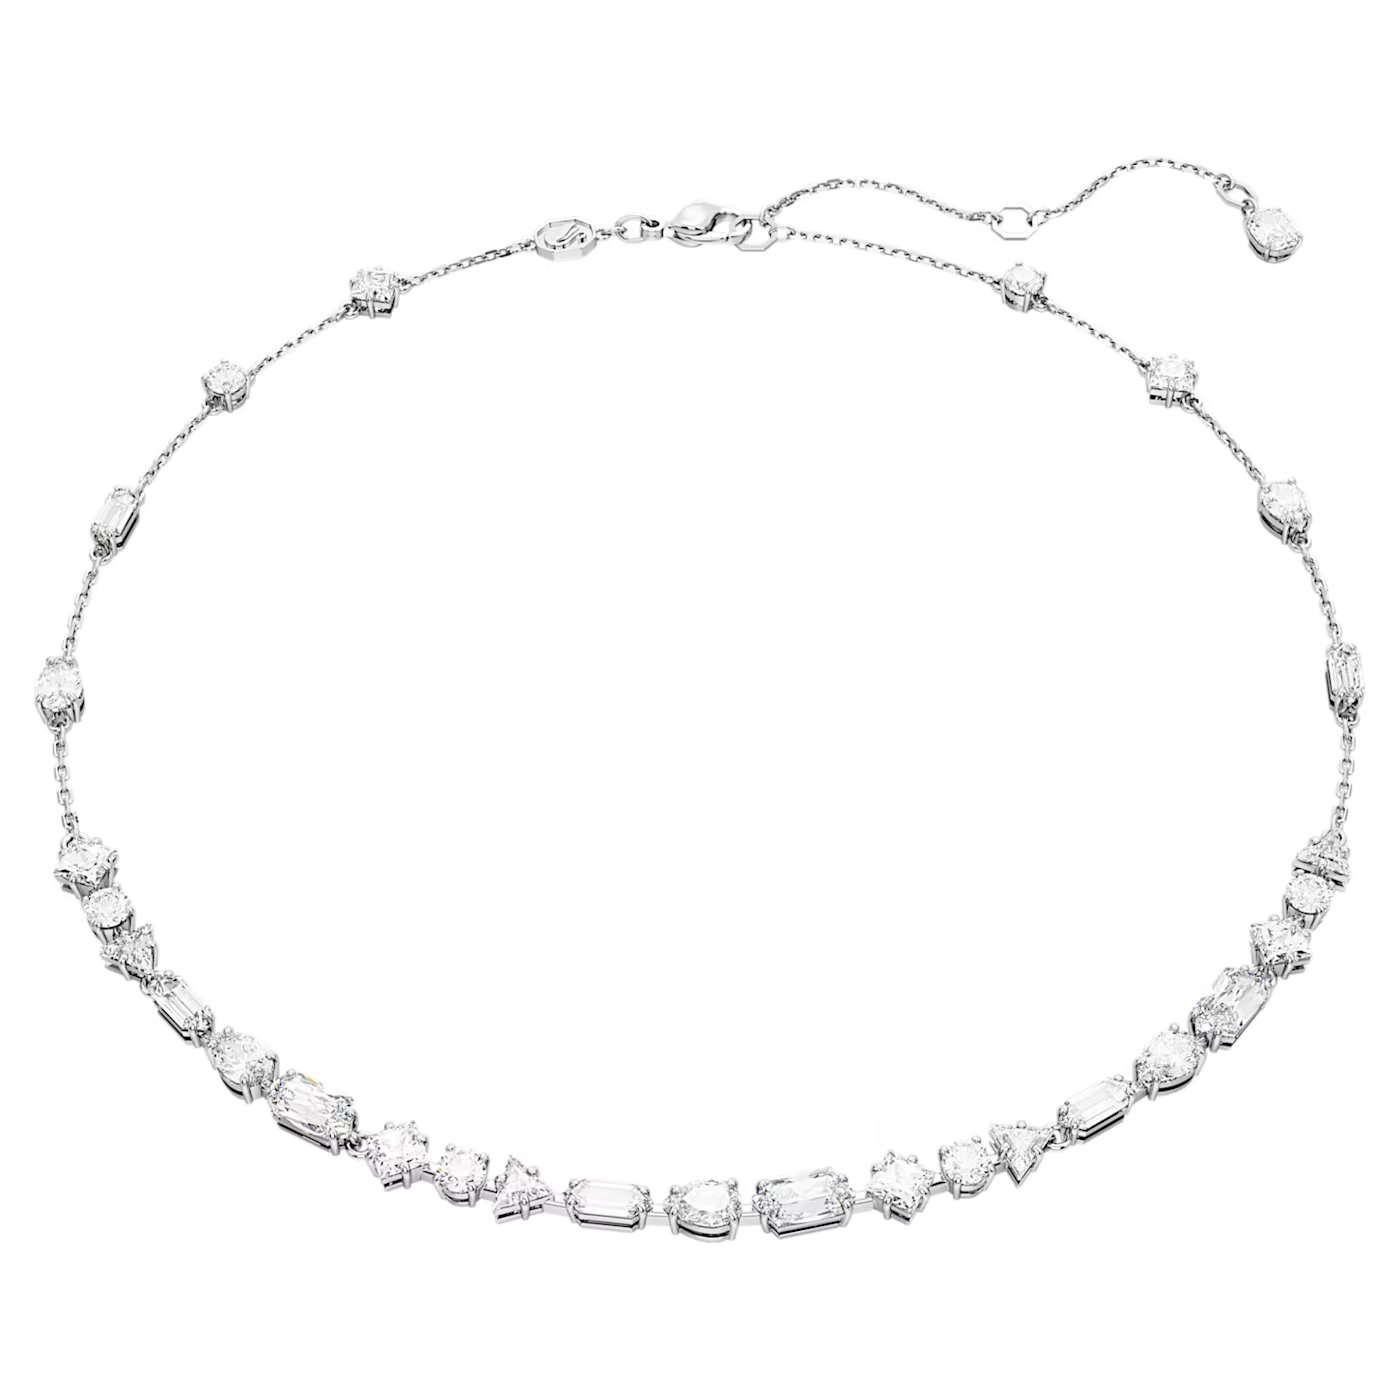 64935ee2db389_mesmera-necklace--mixed-cuts--scattered-design--white--rhodium-plated-swarovski-5676989.jpg